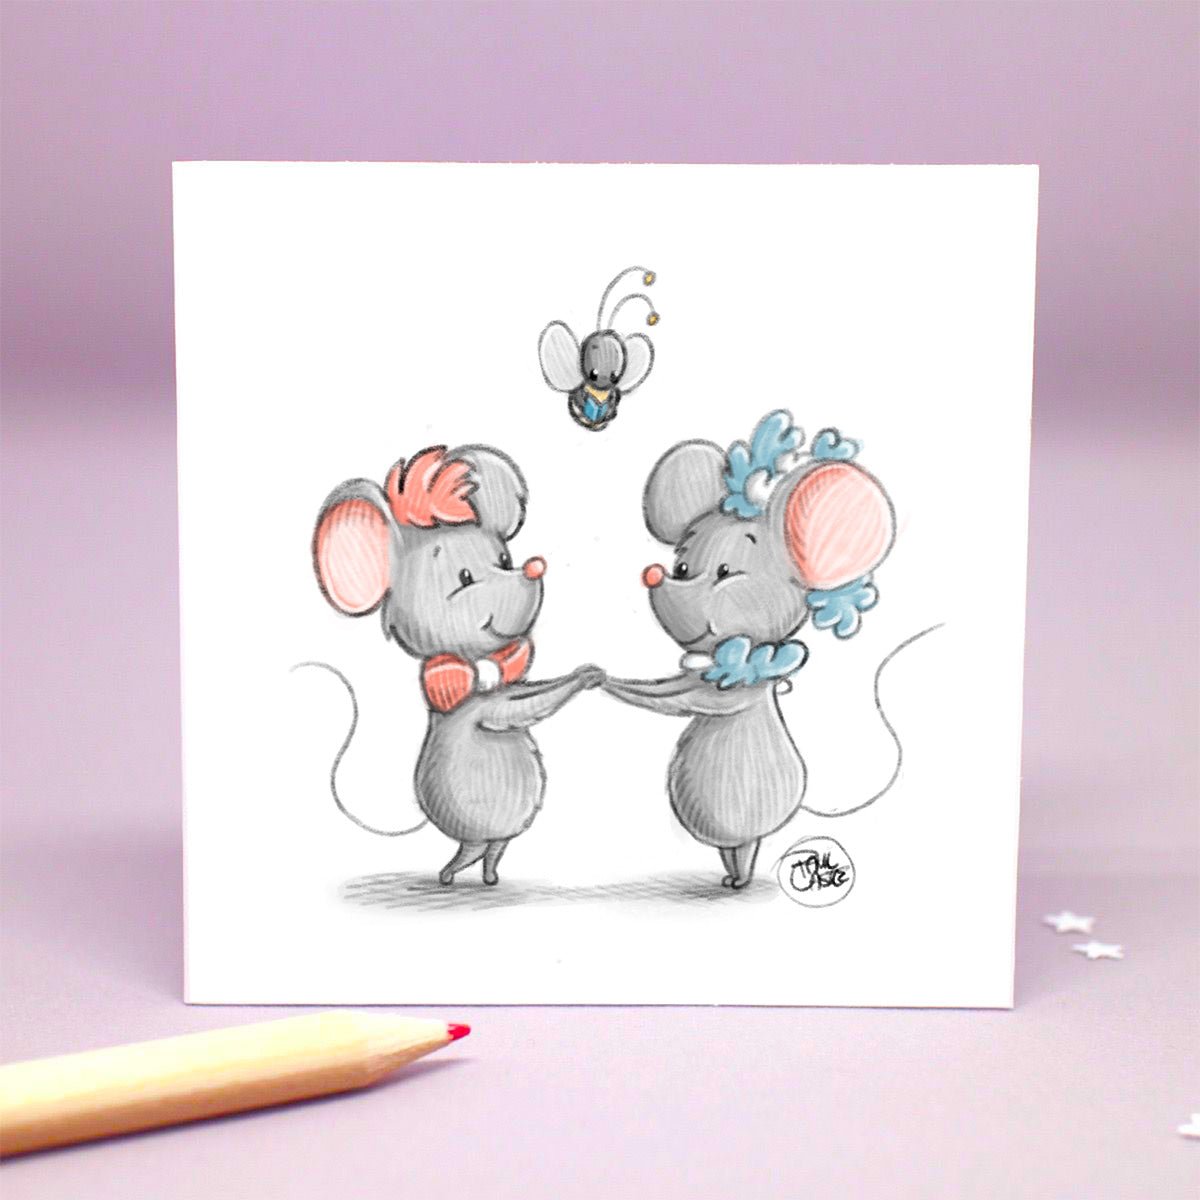 I Only Have Mice For You - Art Print - Paul Castle Studio